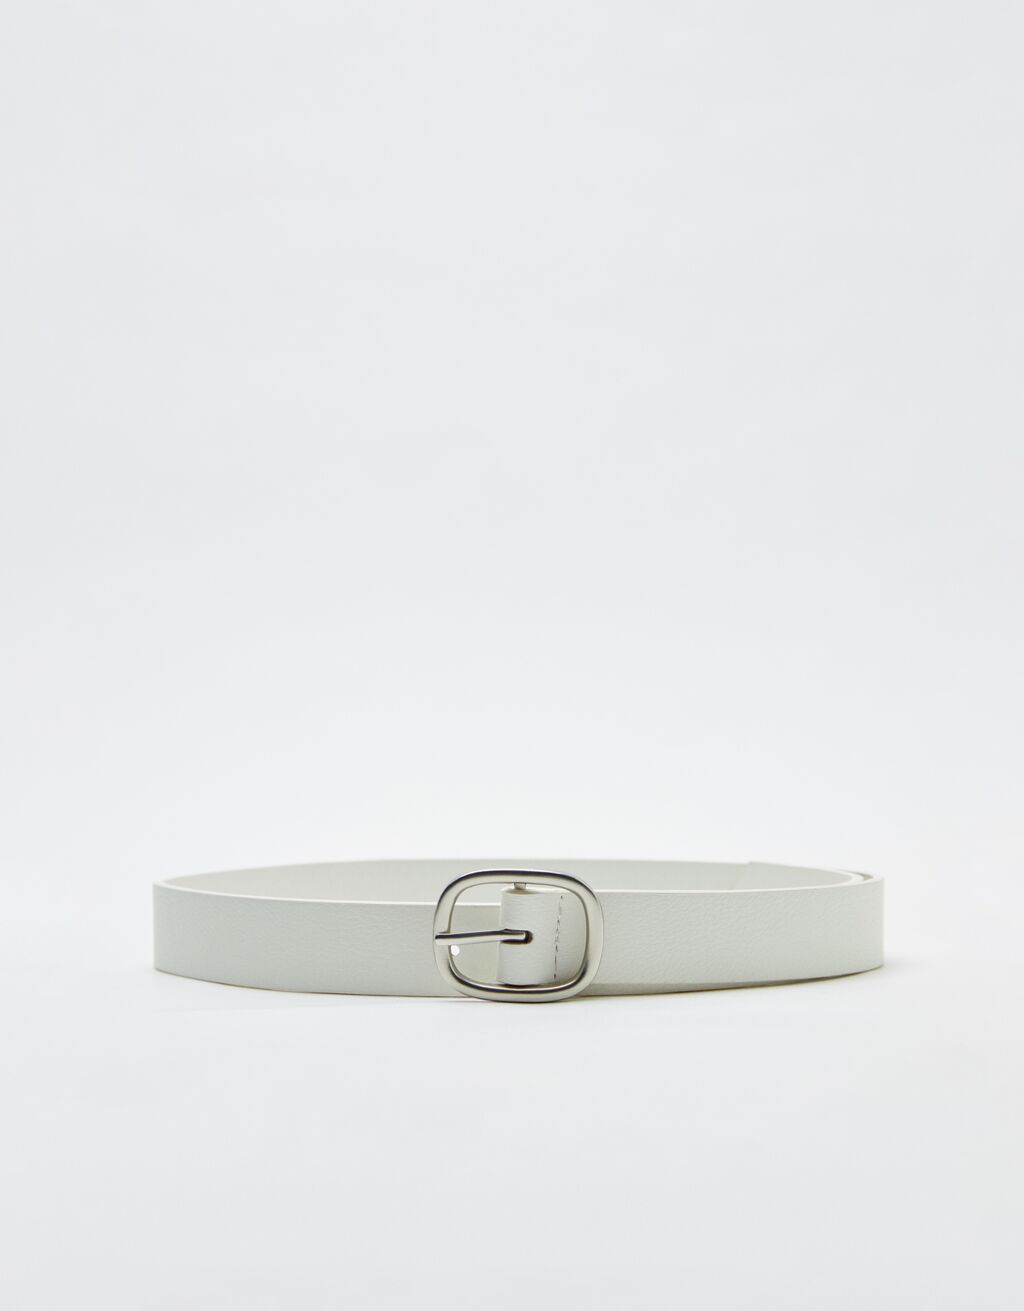 Plain belt with silver-effect buckle